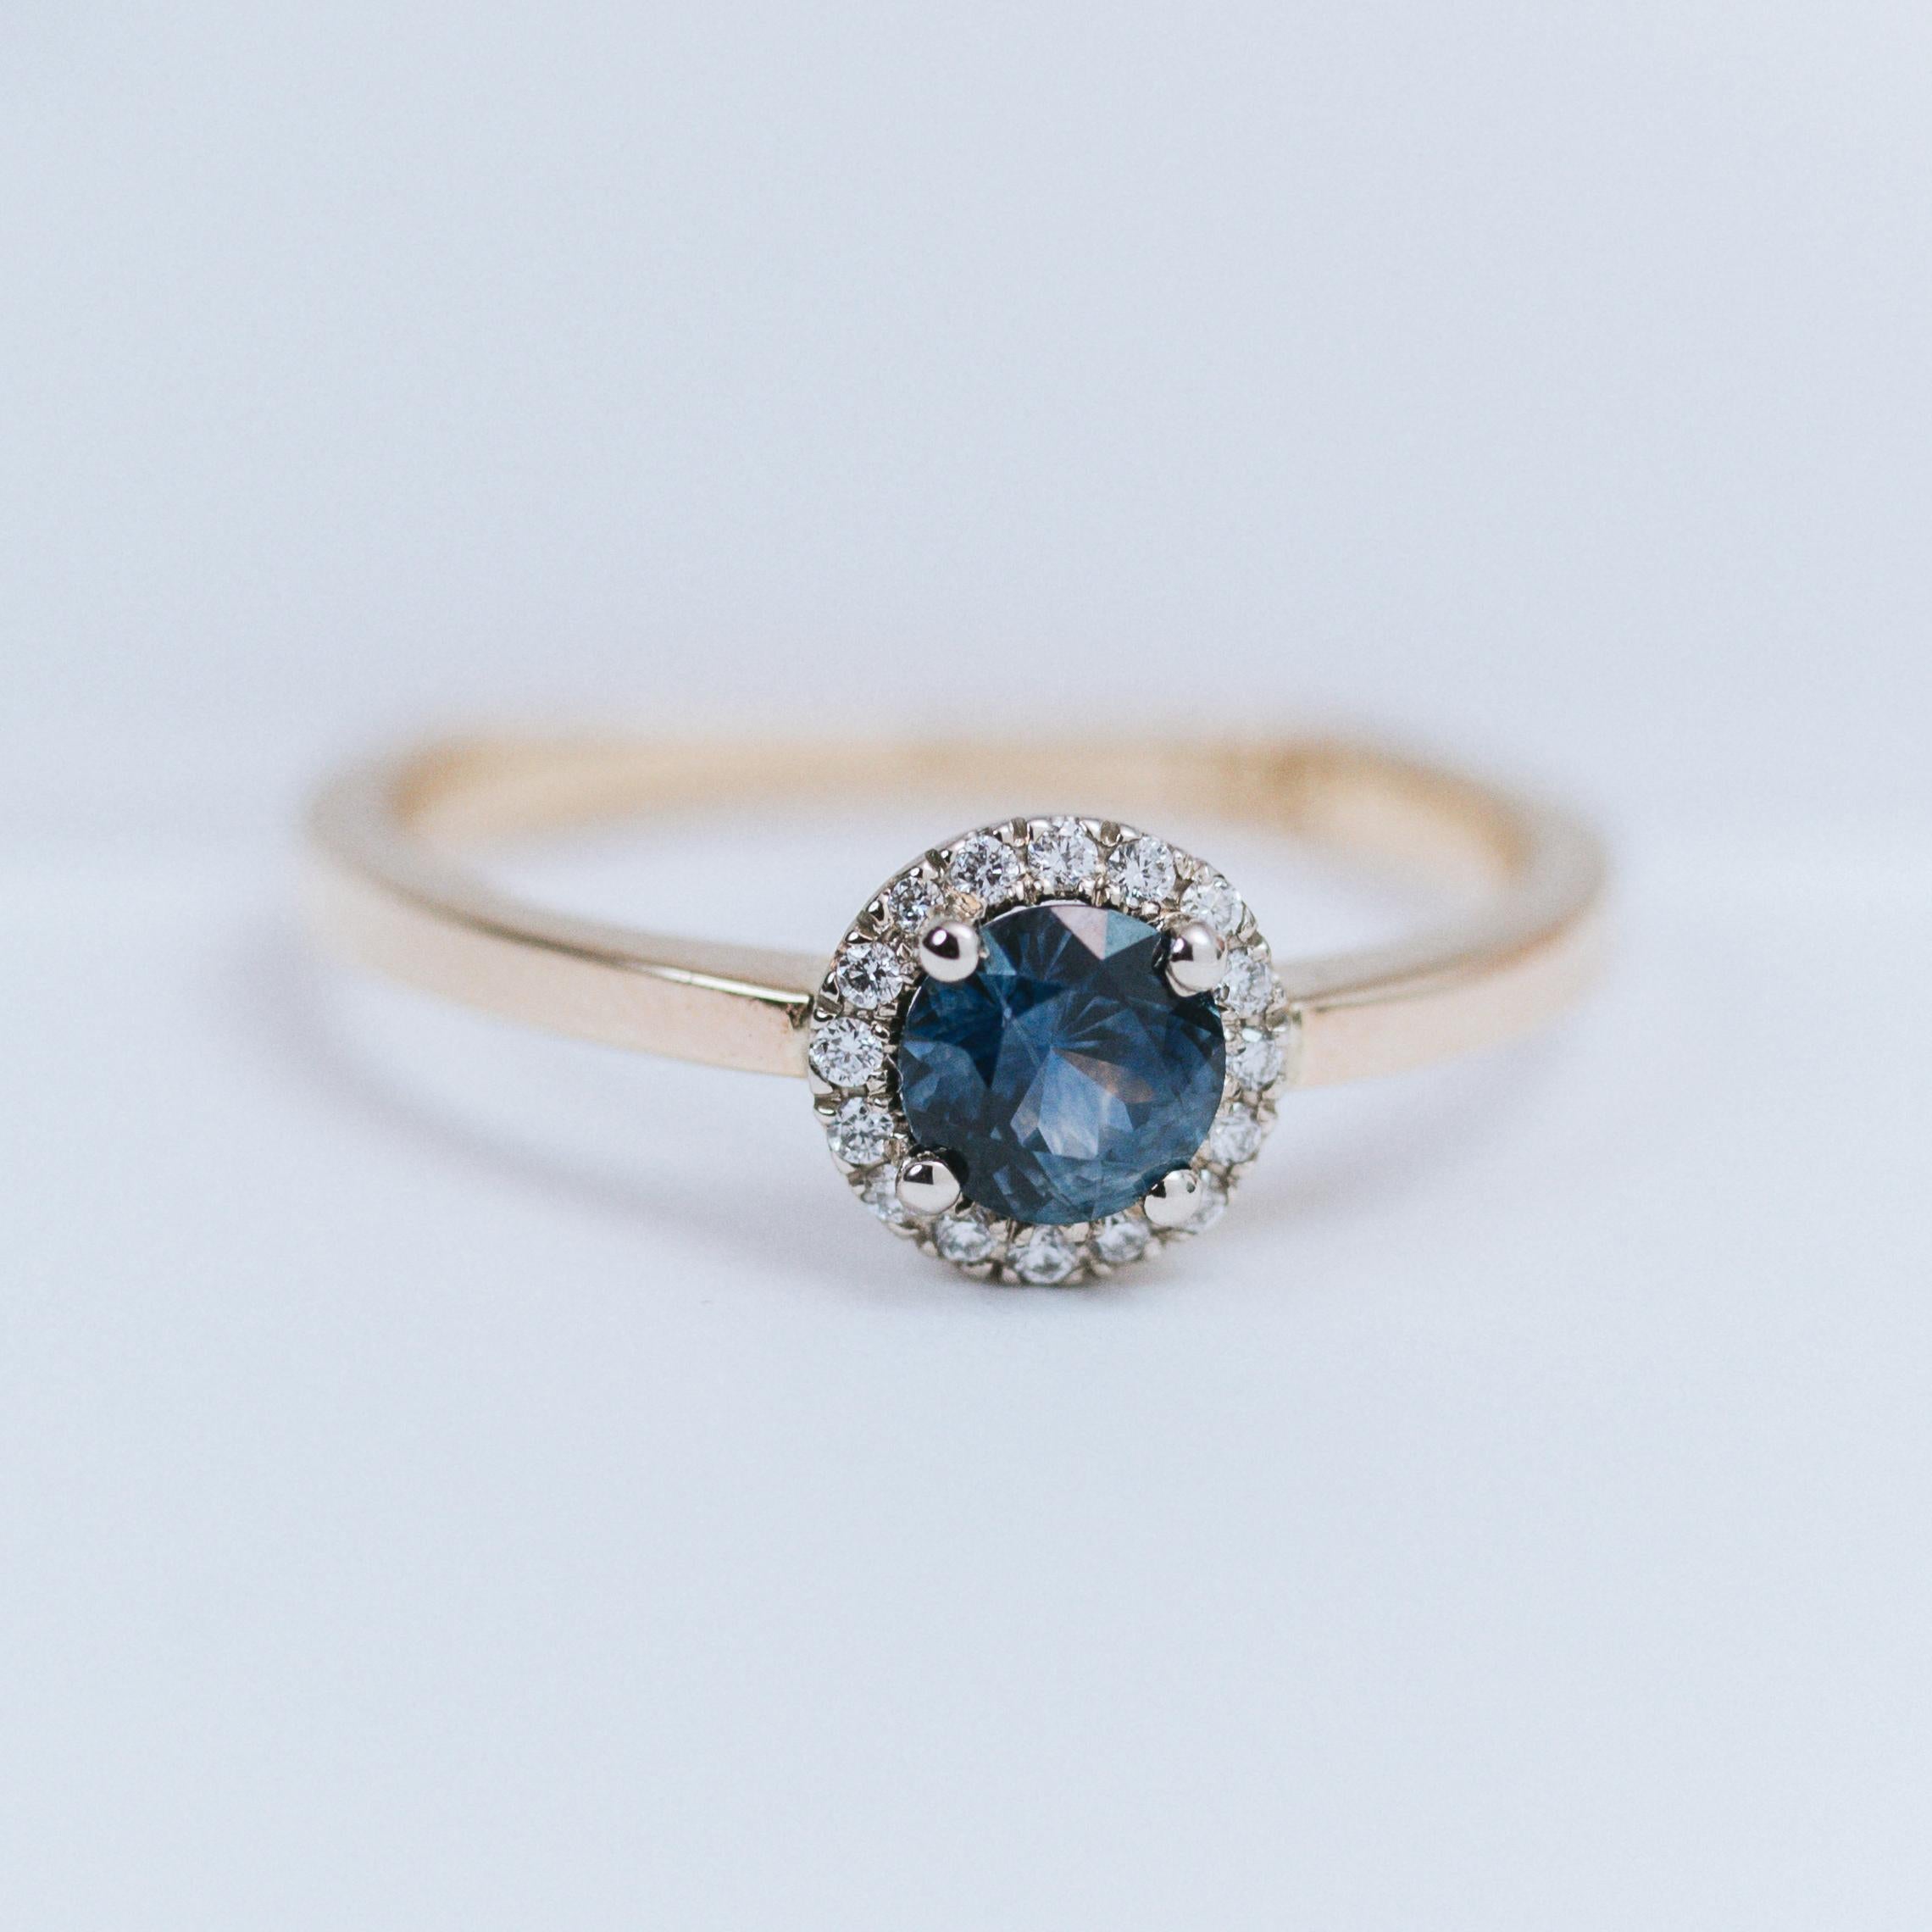 Ring in 14k gold with a 0.5 carat (5mm) Montana sapphire and natural 1mm diamonds halo.
Gemstone setting is made of 14k white gold, the band is made of 14k yellow gold.
Other colors and karats of gold, as well as platinum are available. We can also